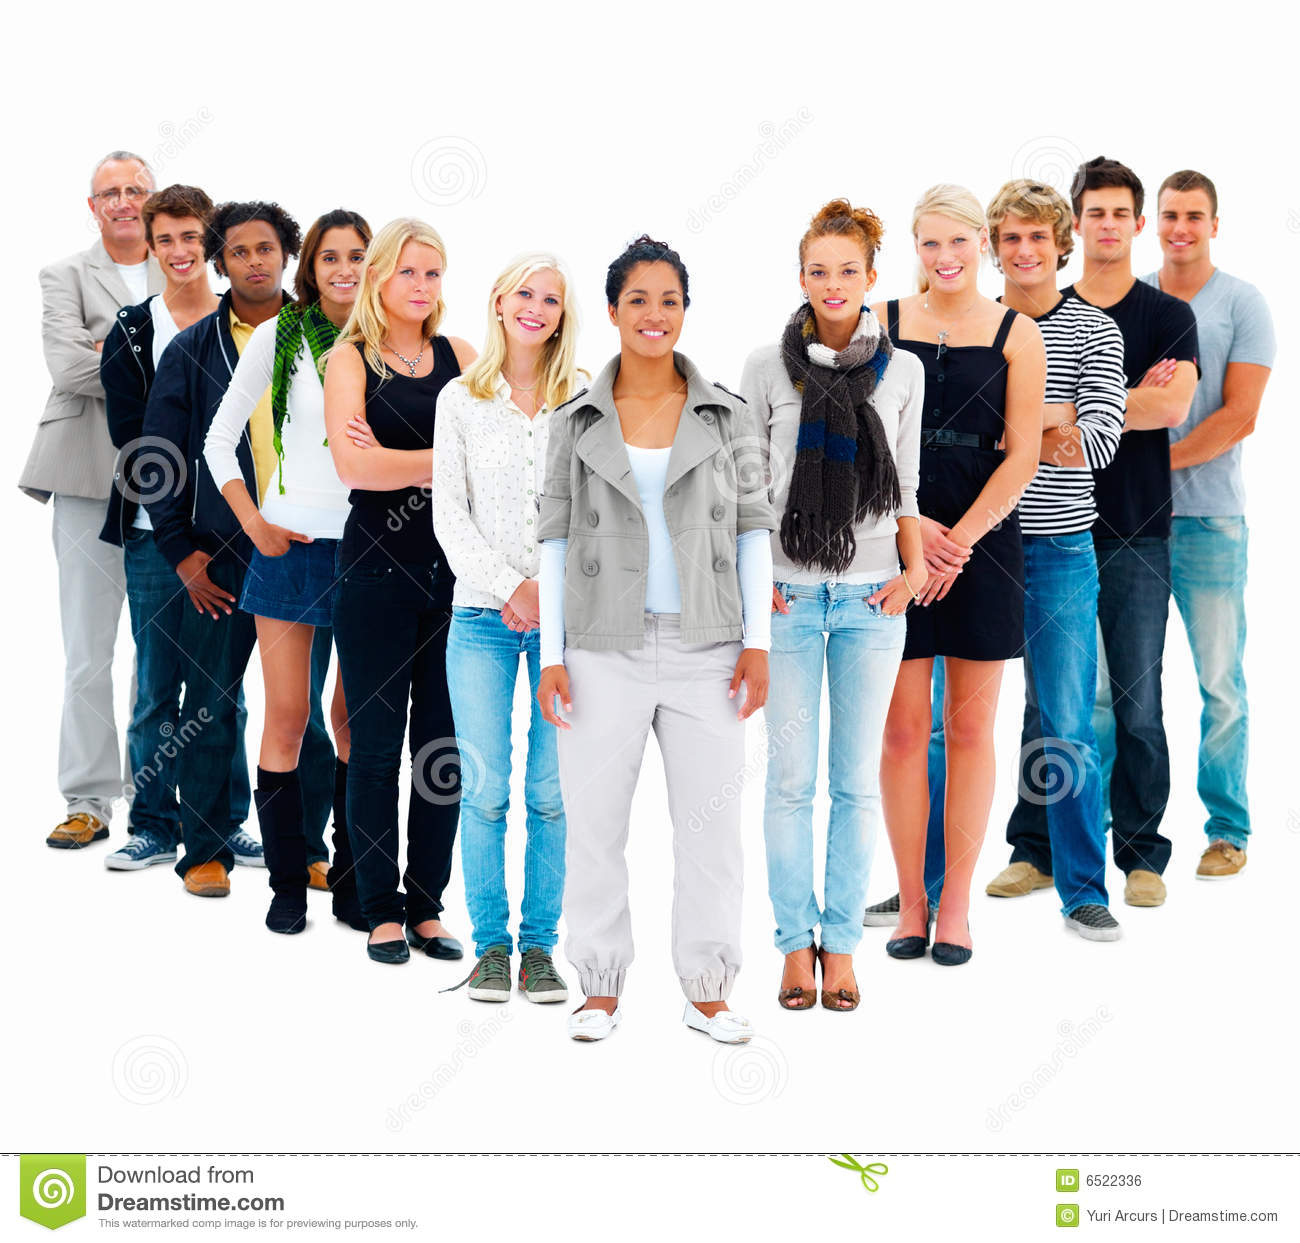 Royalty Free Stock Image  Large Group Of Students Standing In A V    